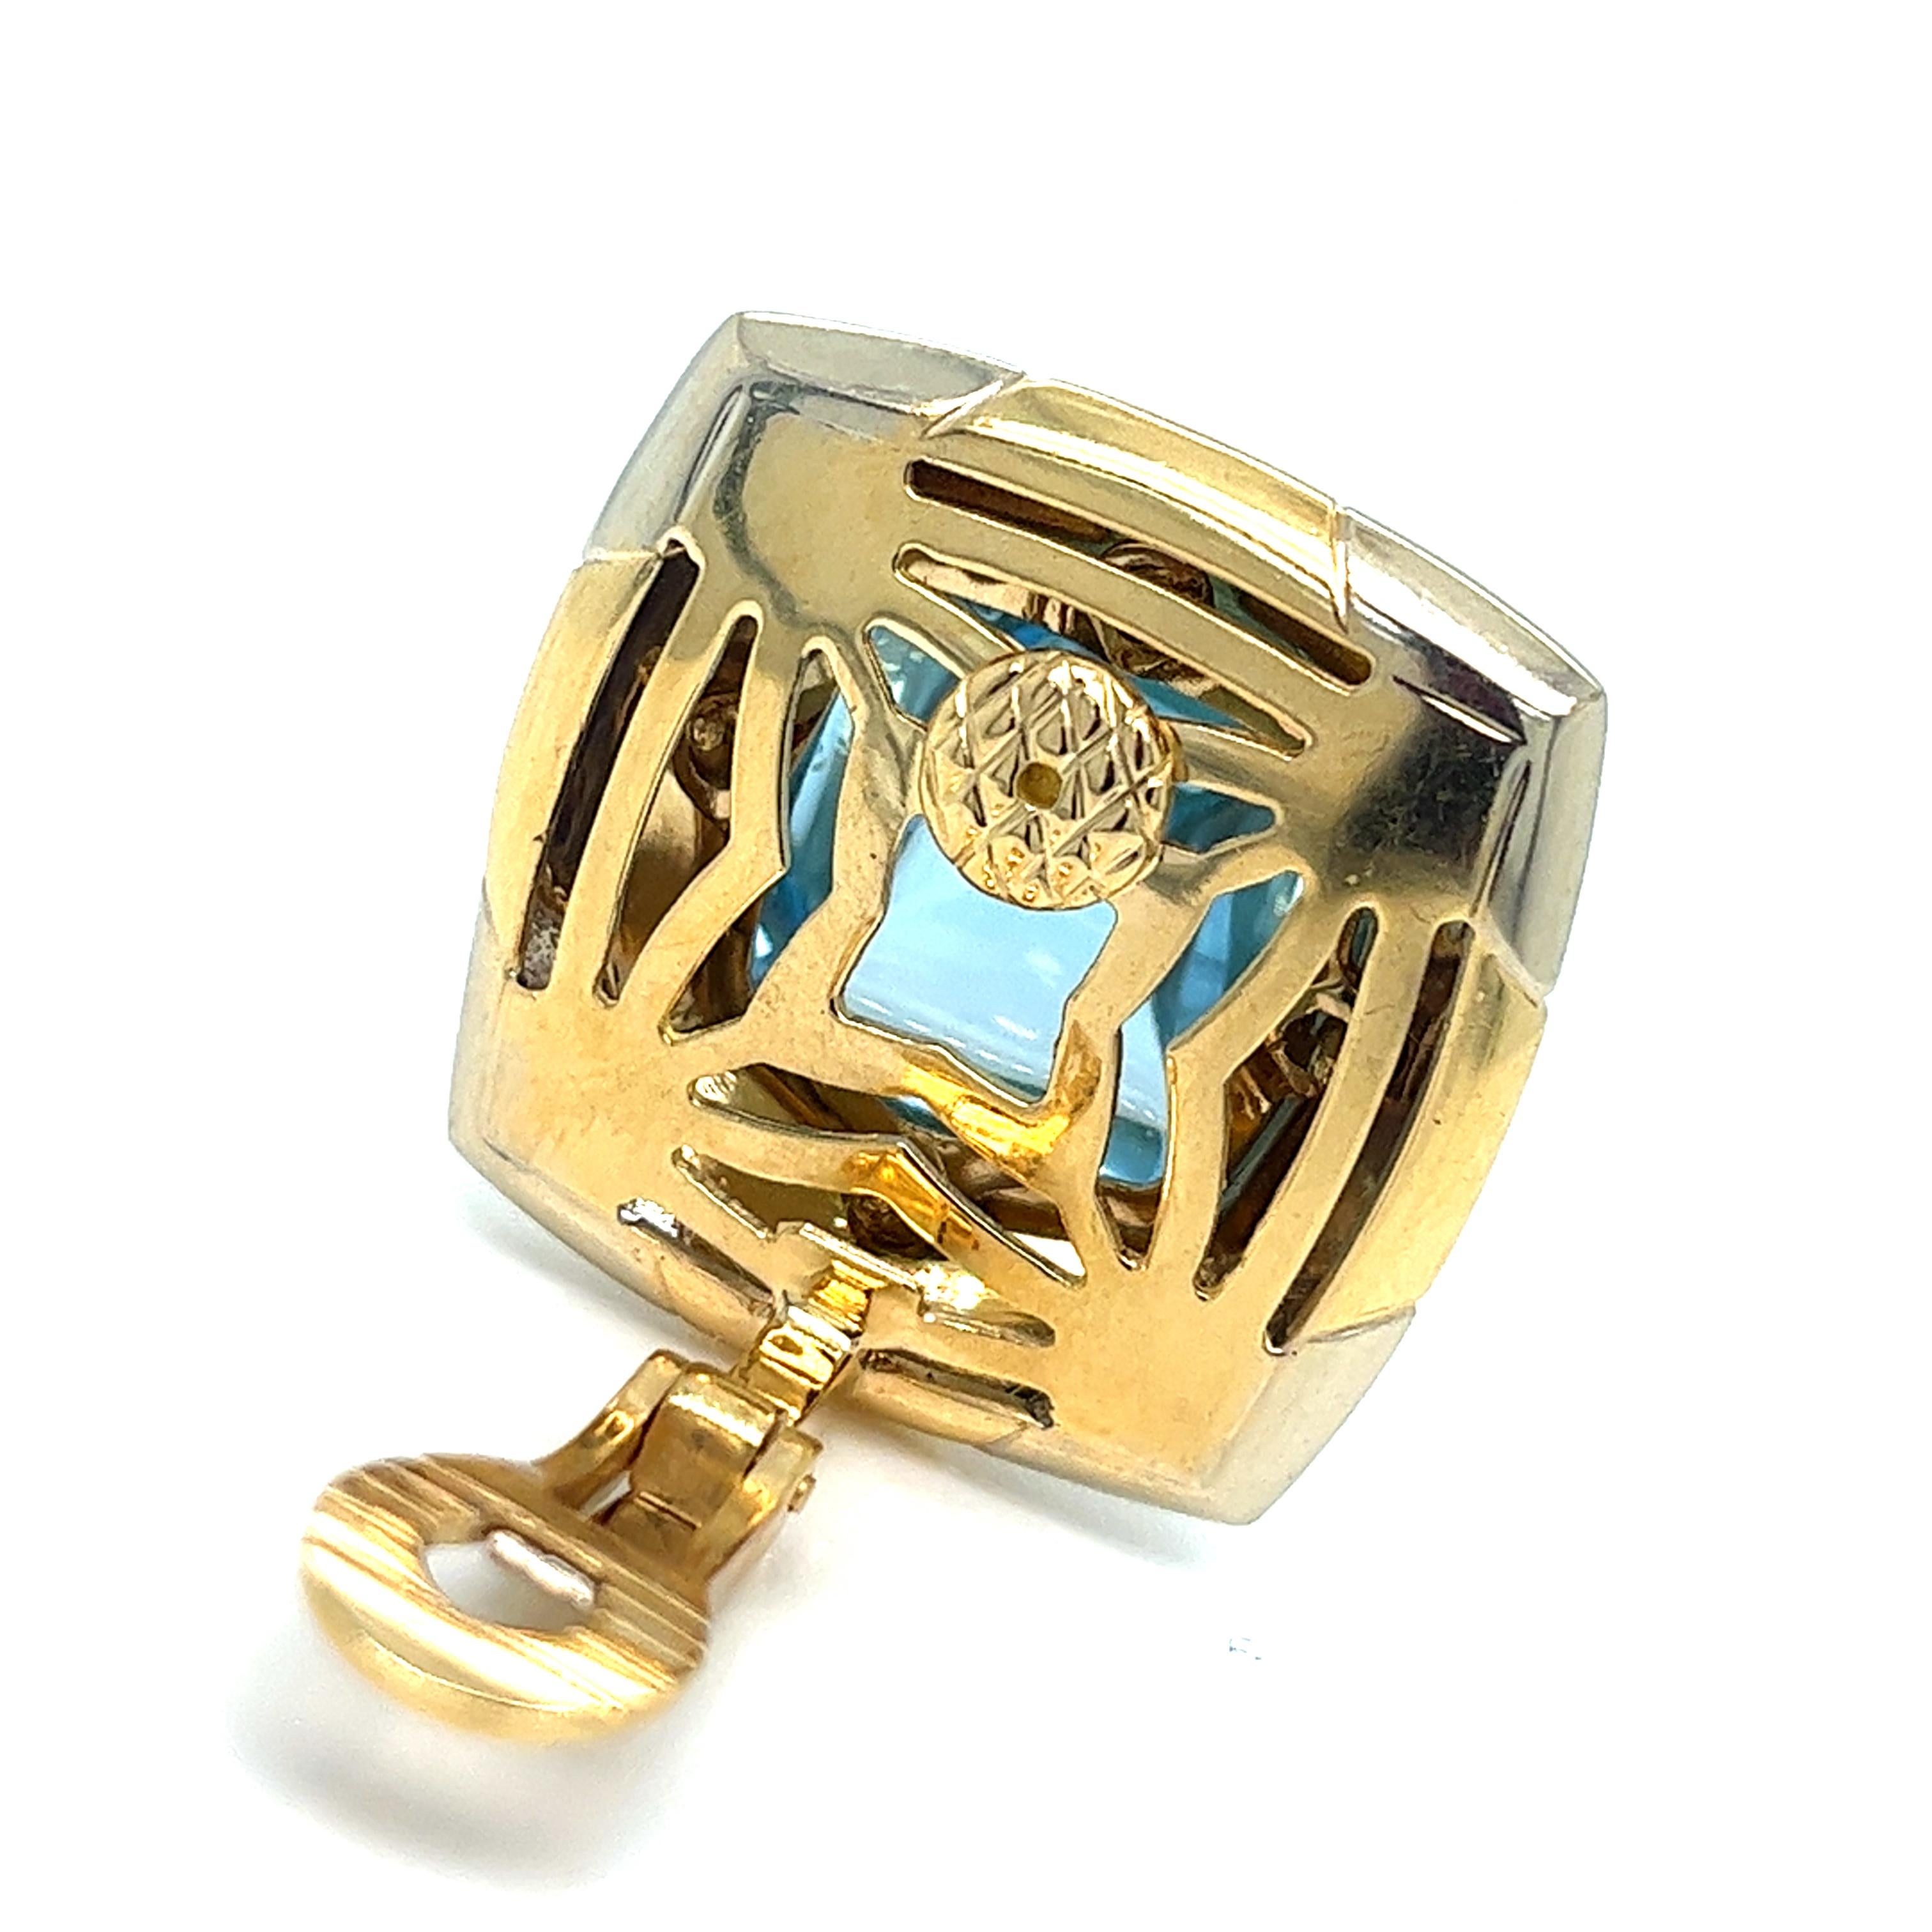 Contemporary Bvlgari  Pyramid Clips Earrings Ring and Pendant 18Kt gold & carved Blue Topaz For Sale